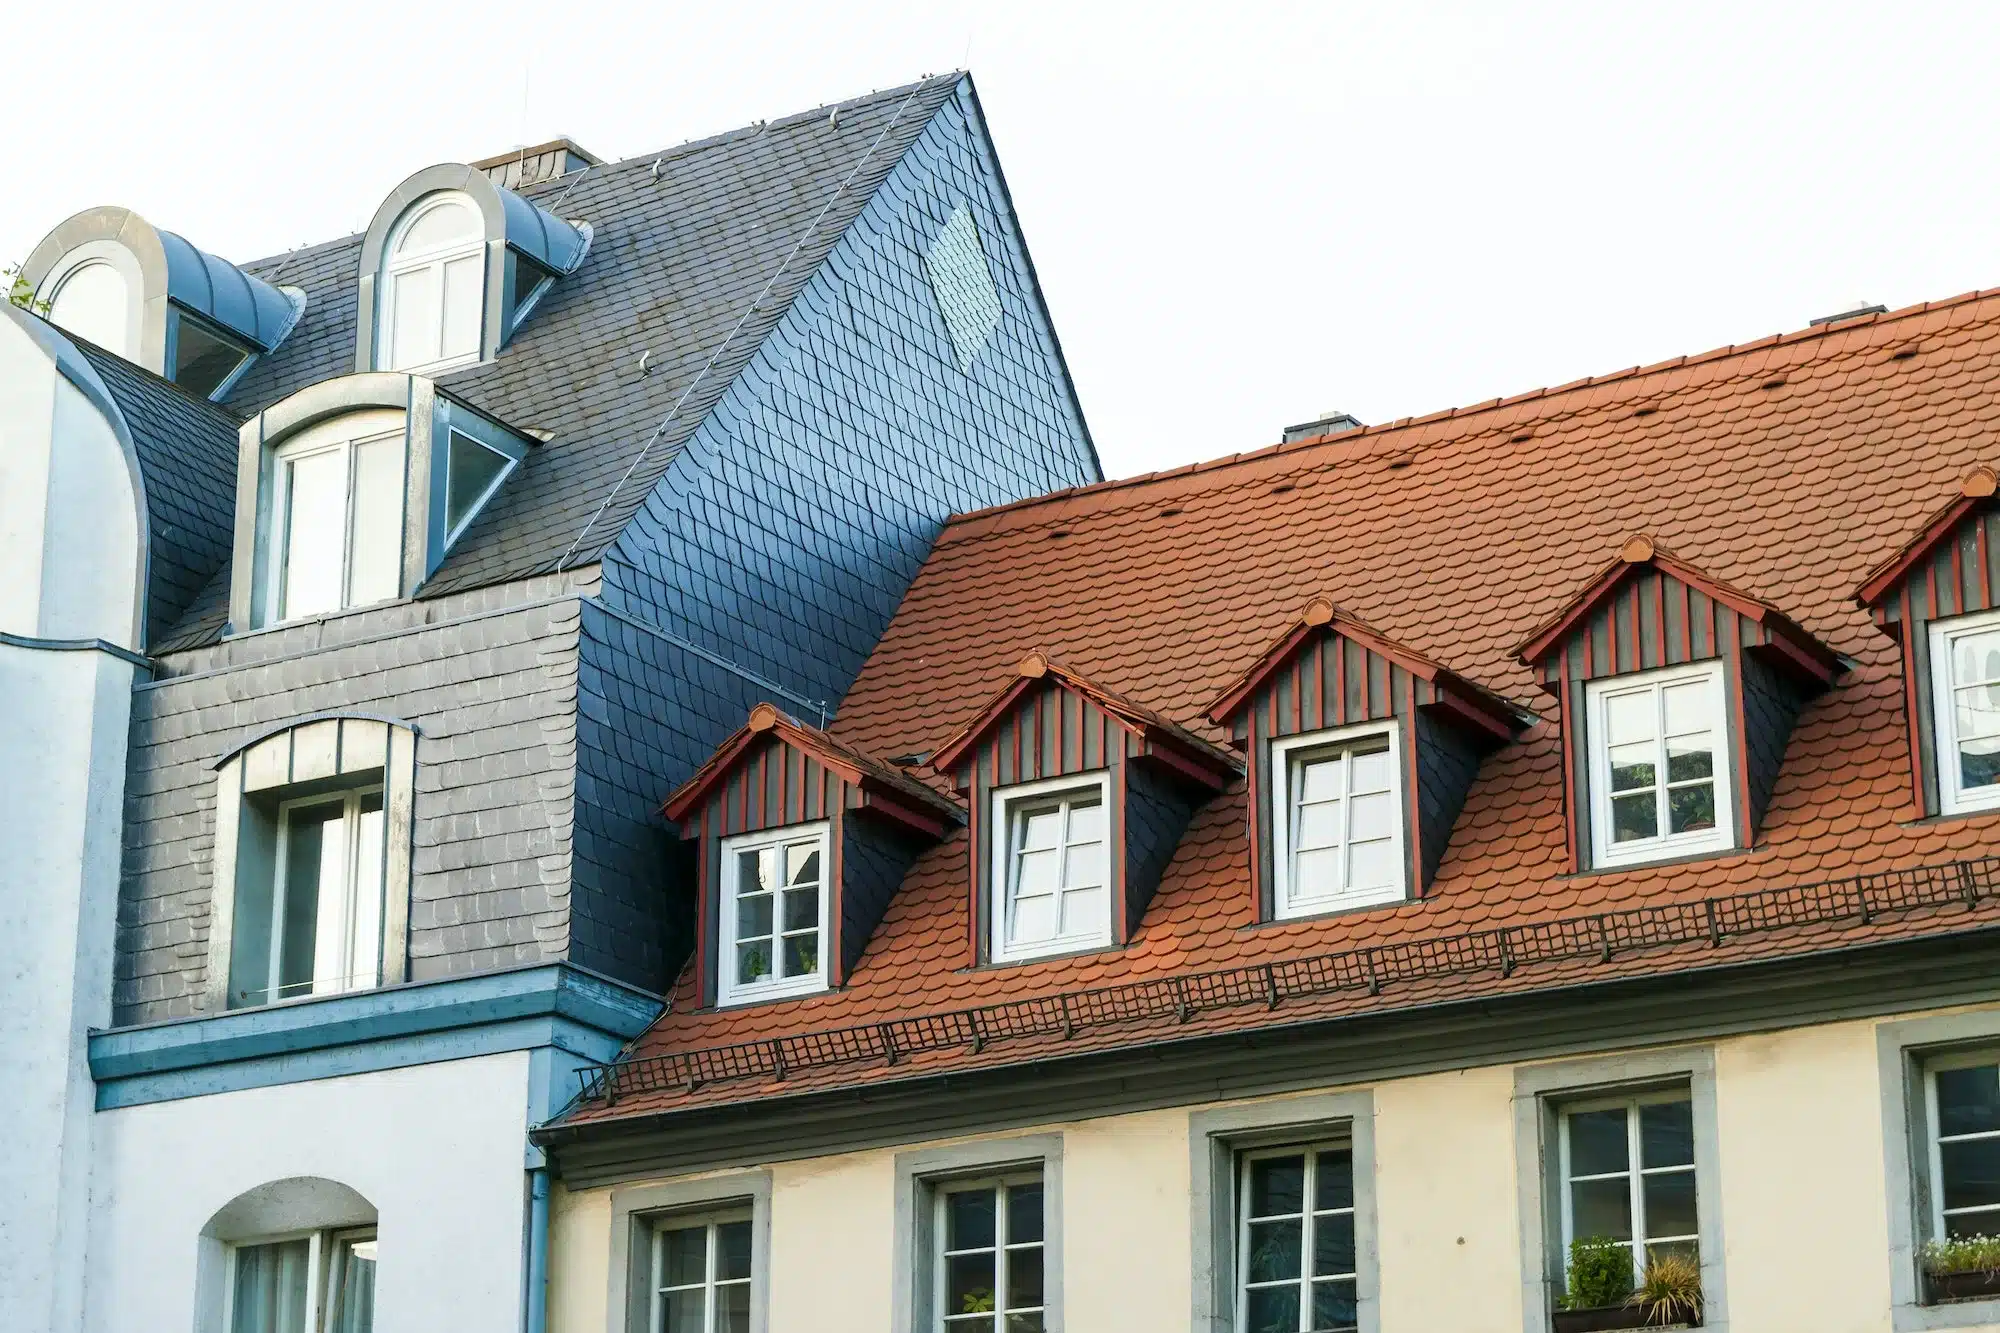 How to Choose the Right Roofing Material for Your Home's Architectural Style